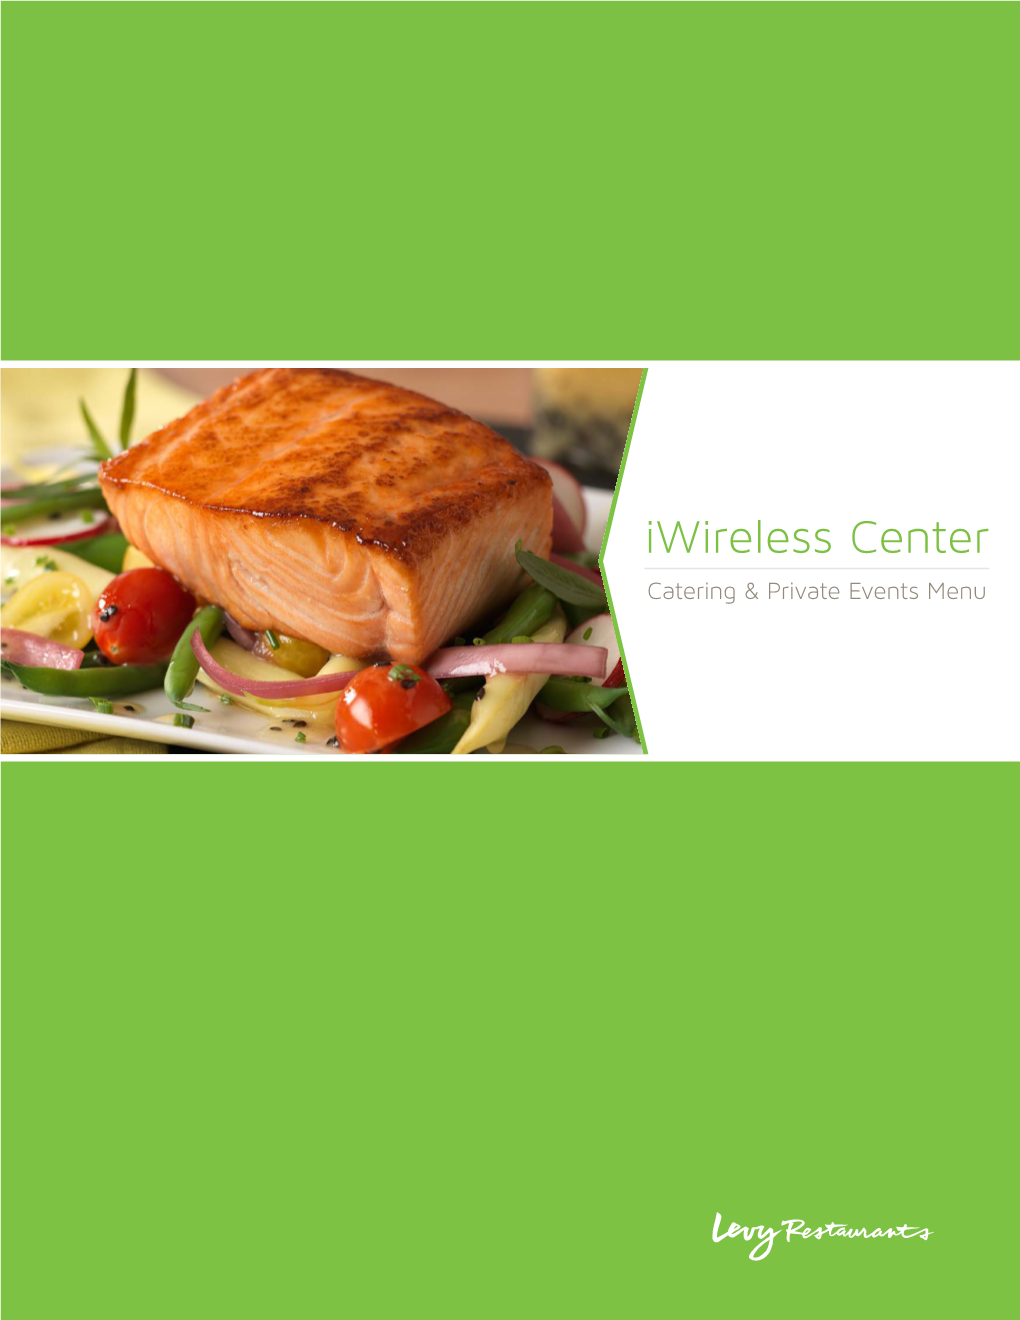 Iwireless Center Catering & Private Events Menu Your Chef